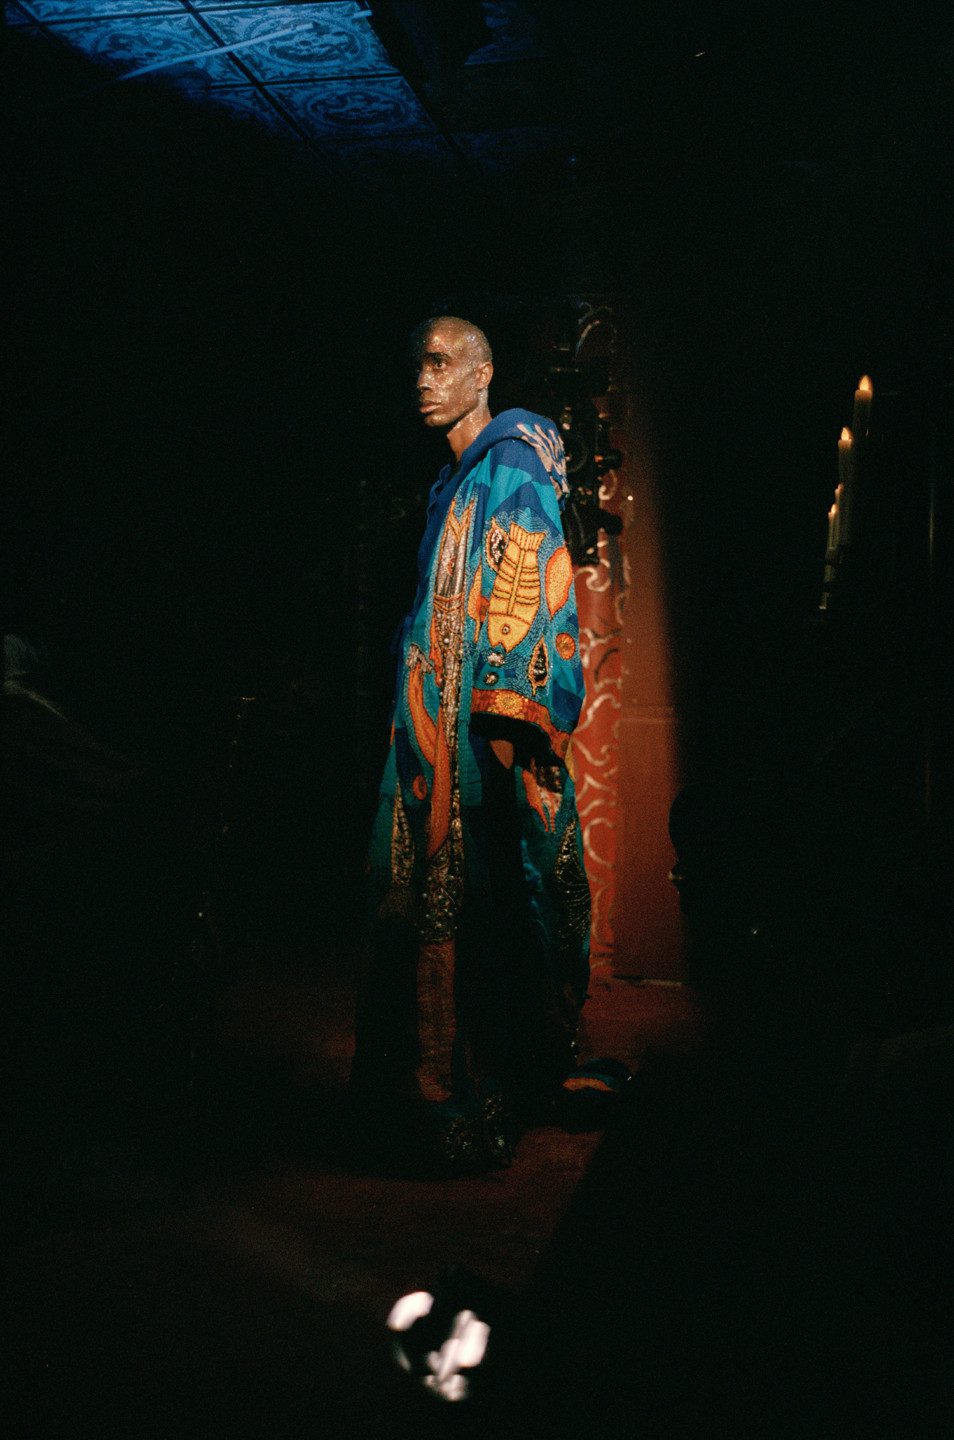 Photo from the film shoot, a person in a floor-long coat with hood